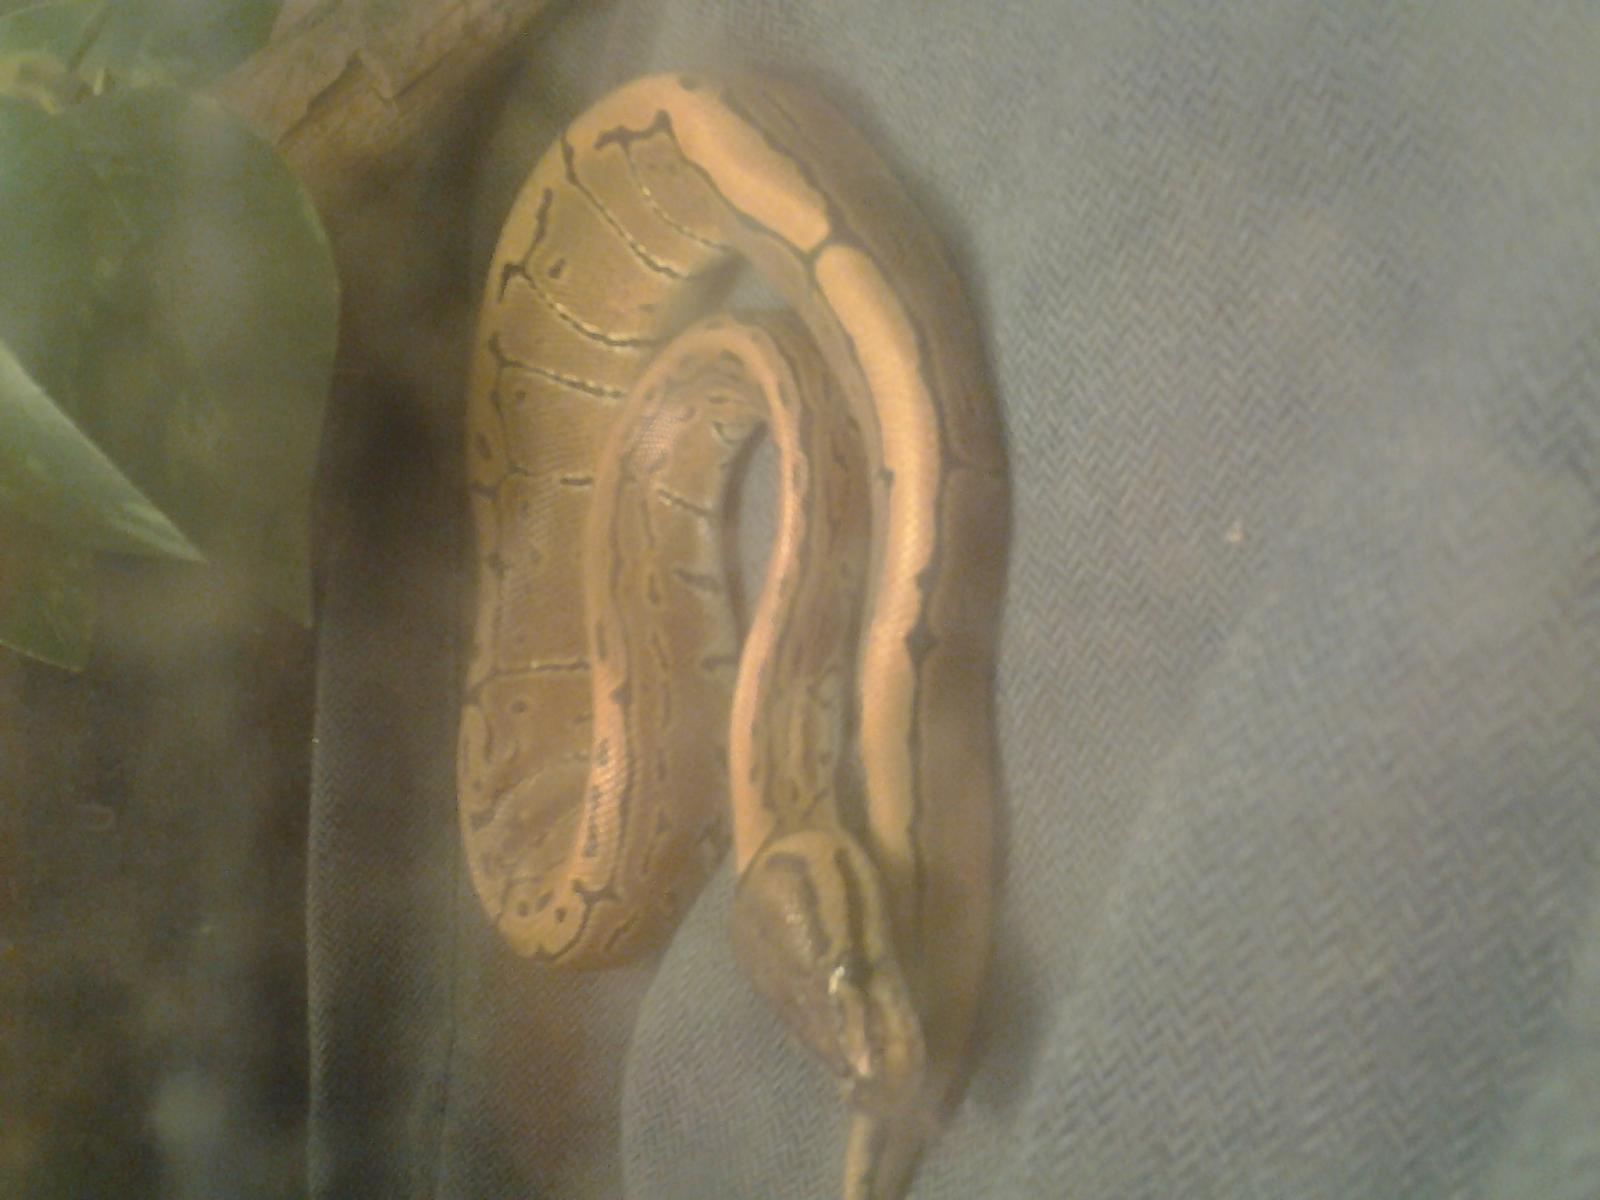 does anybody know what kind of ball python this is?